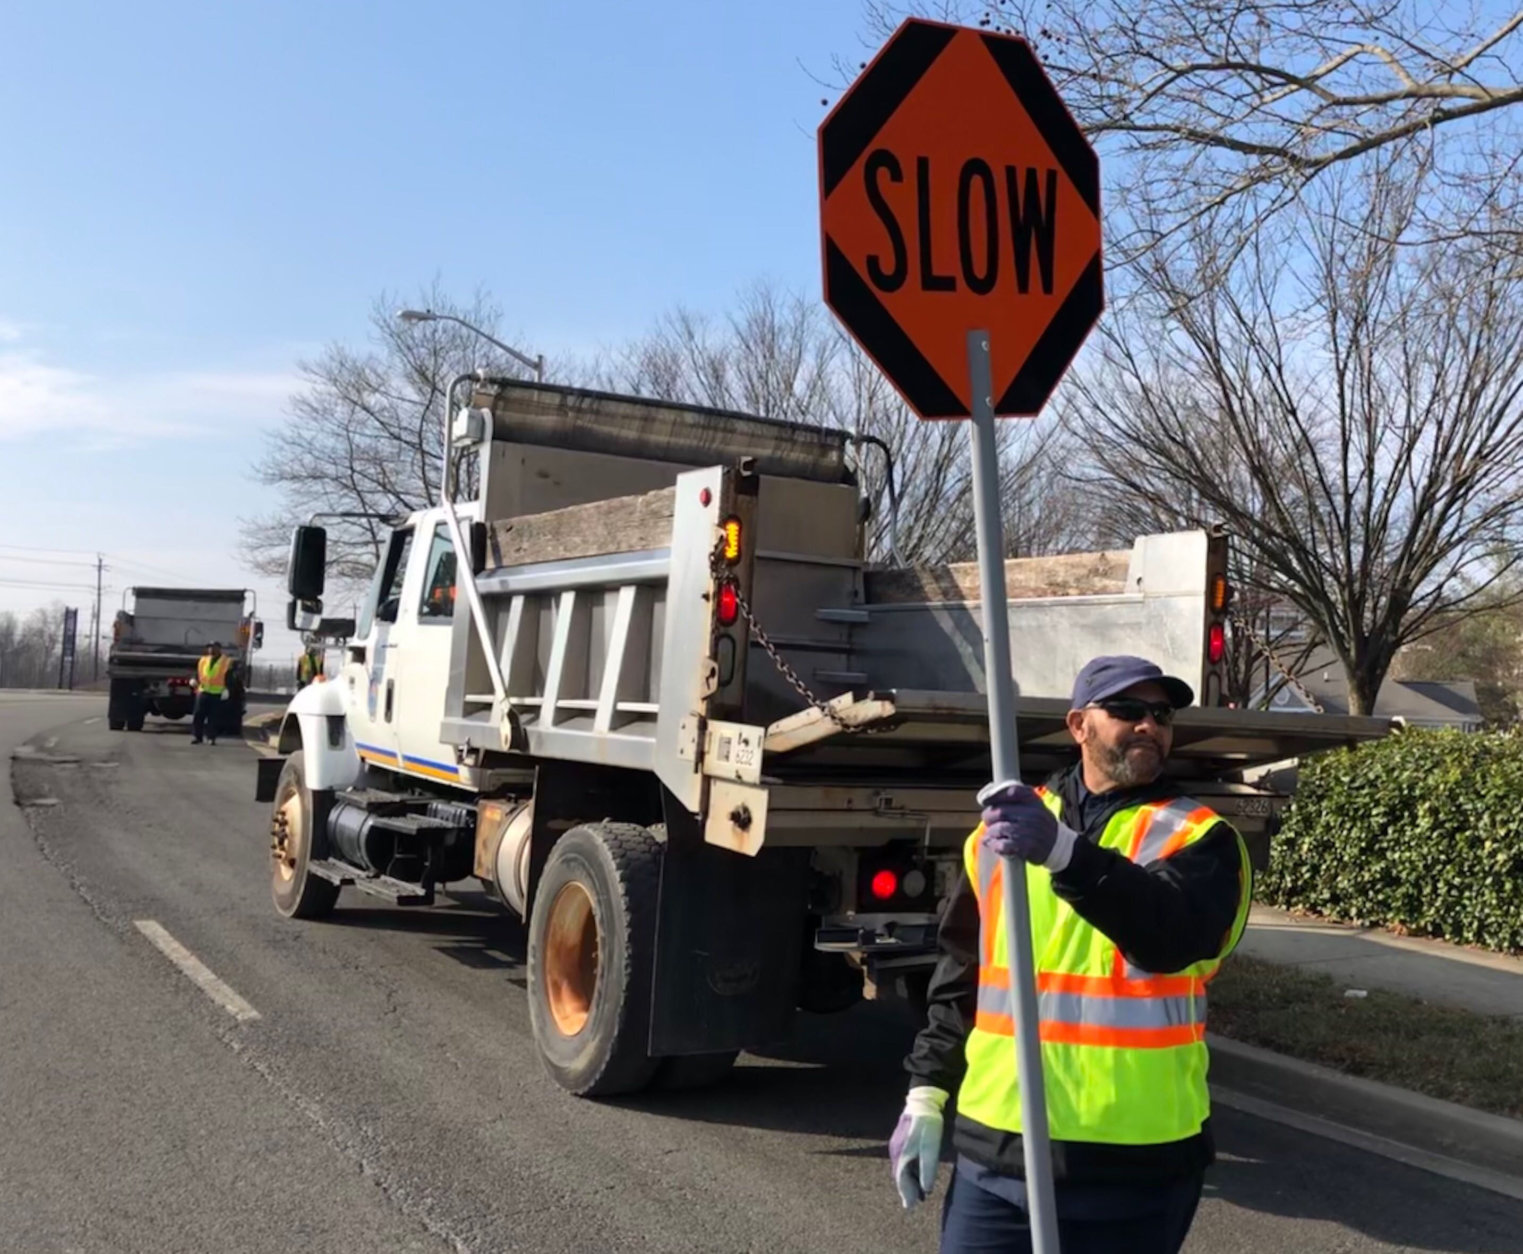 "We have our crew out here and we have signs saying 'Slow,' and even with that, motorists are still driving extremely fast," Jones said to WTOP. (WTOP/Kristi King)